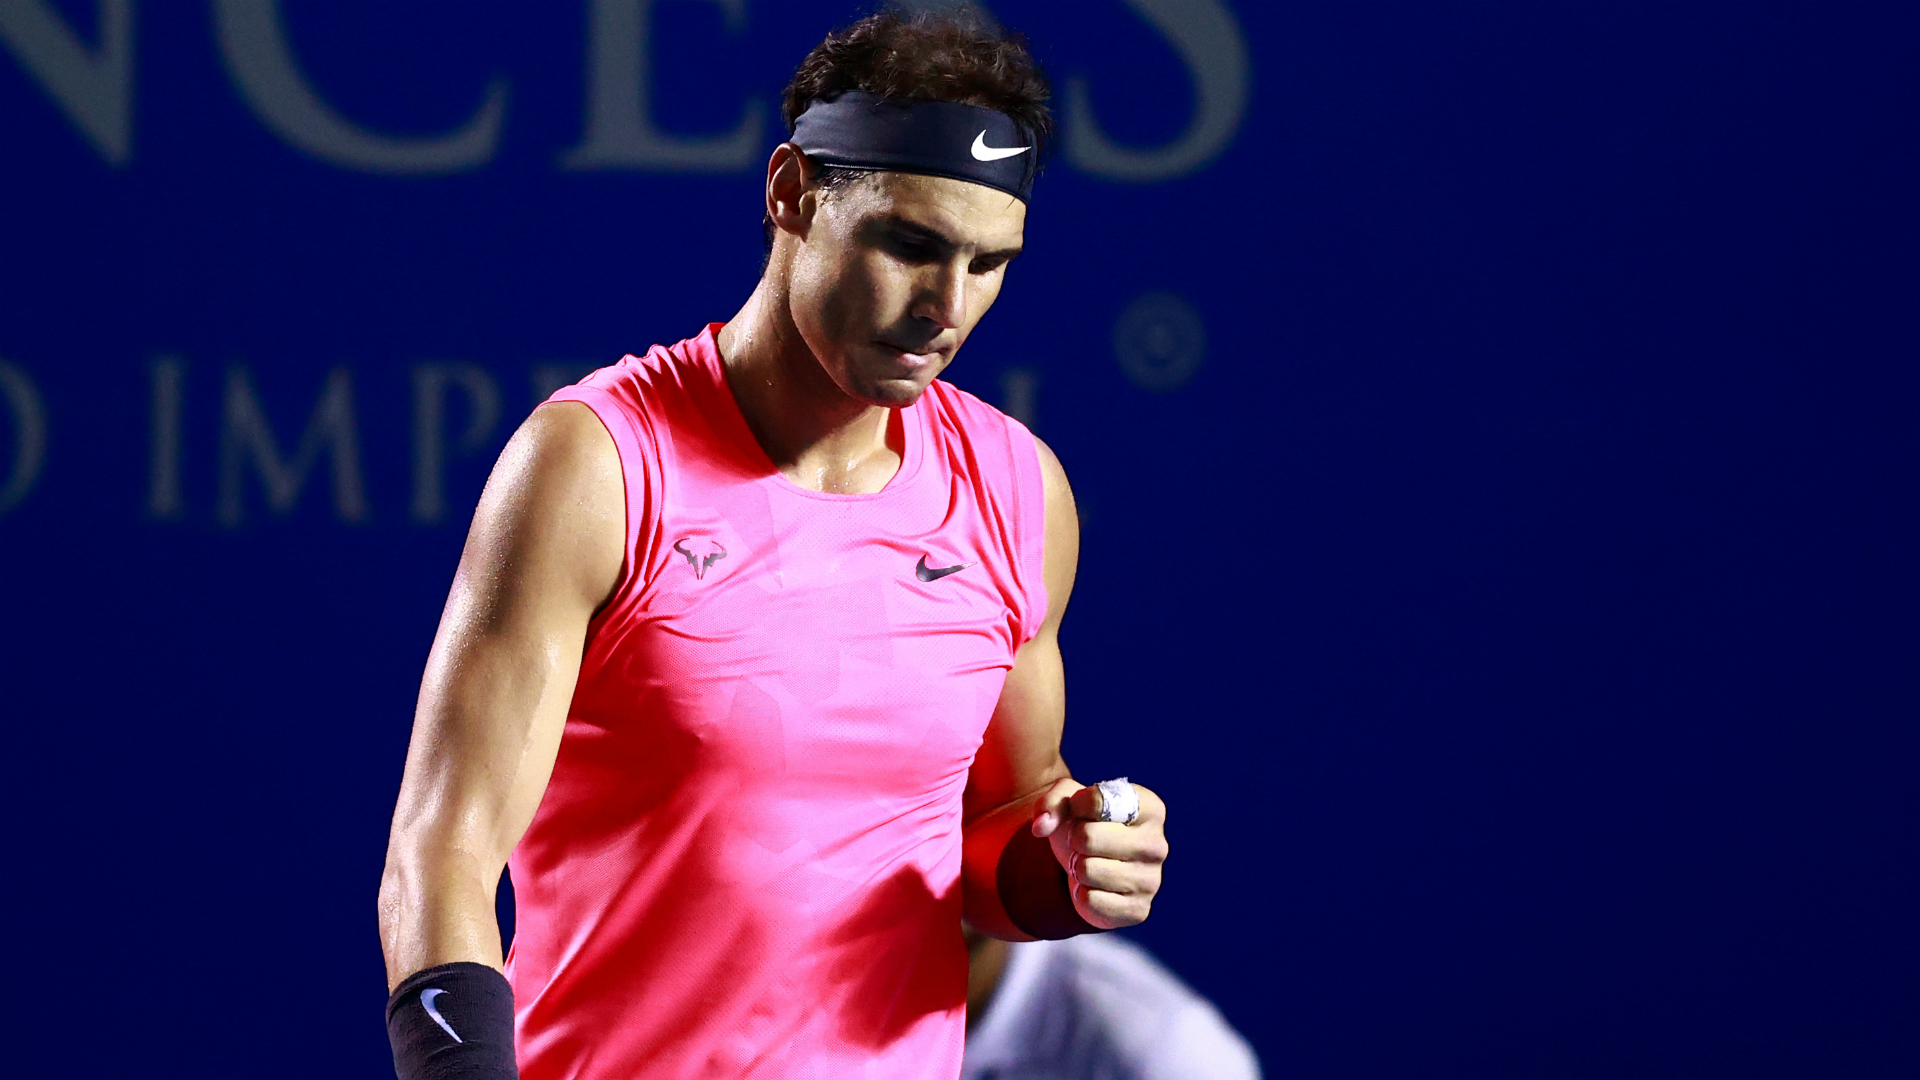 Rafael Nadal powered through to the last eight but second seed Alexander Zverev fell on Wednesday, while Grigor Dimitrov survived.